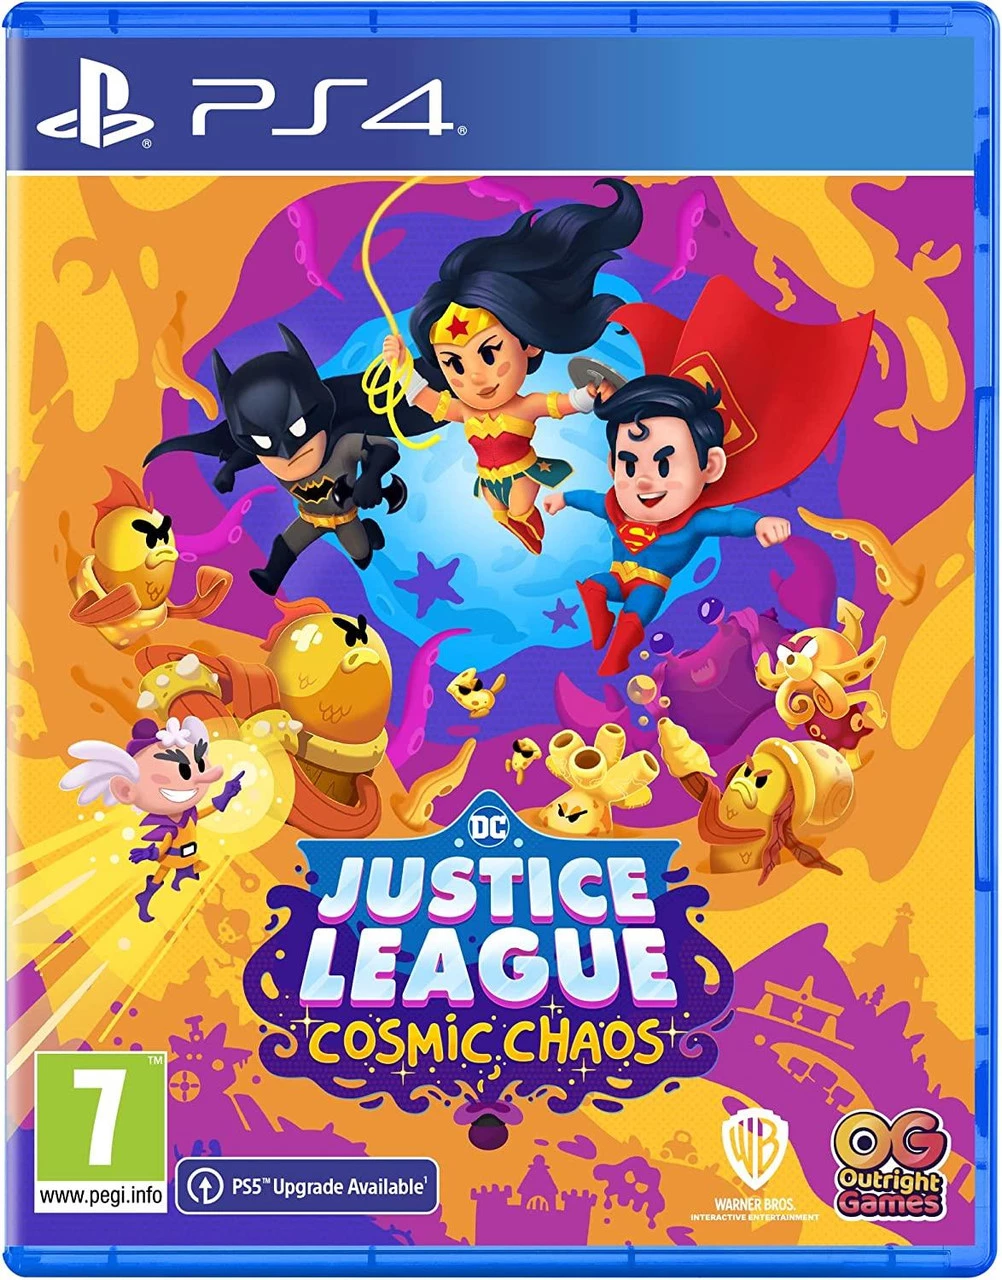 DC's Justice League Cosmic Chaos (PS4), Outright Games